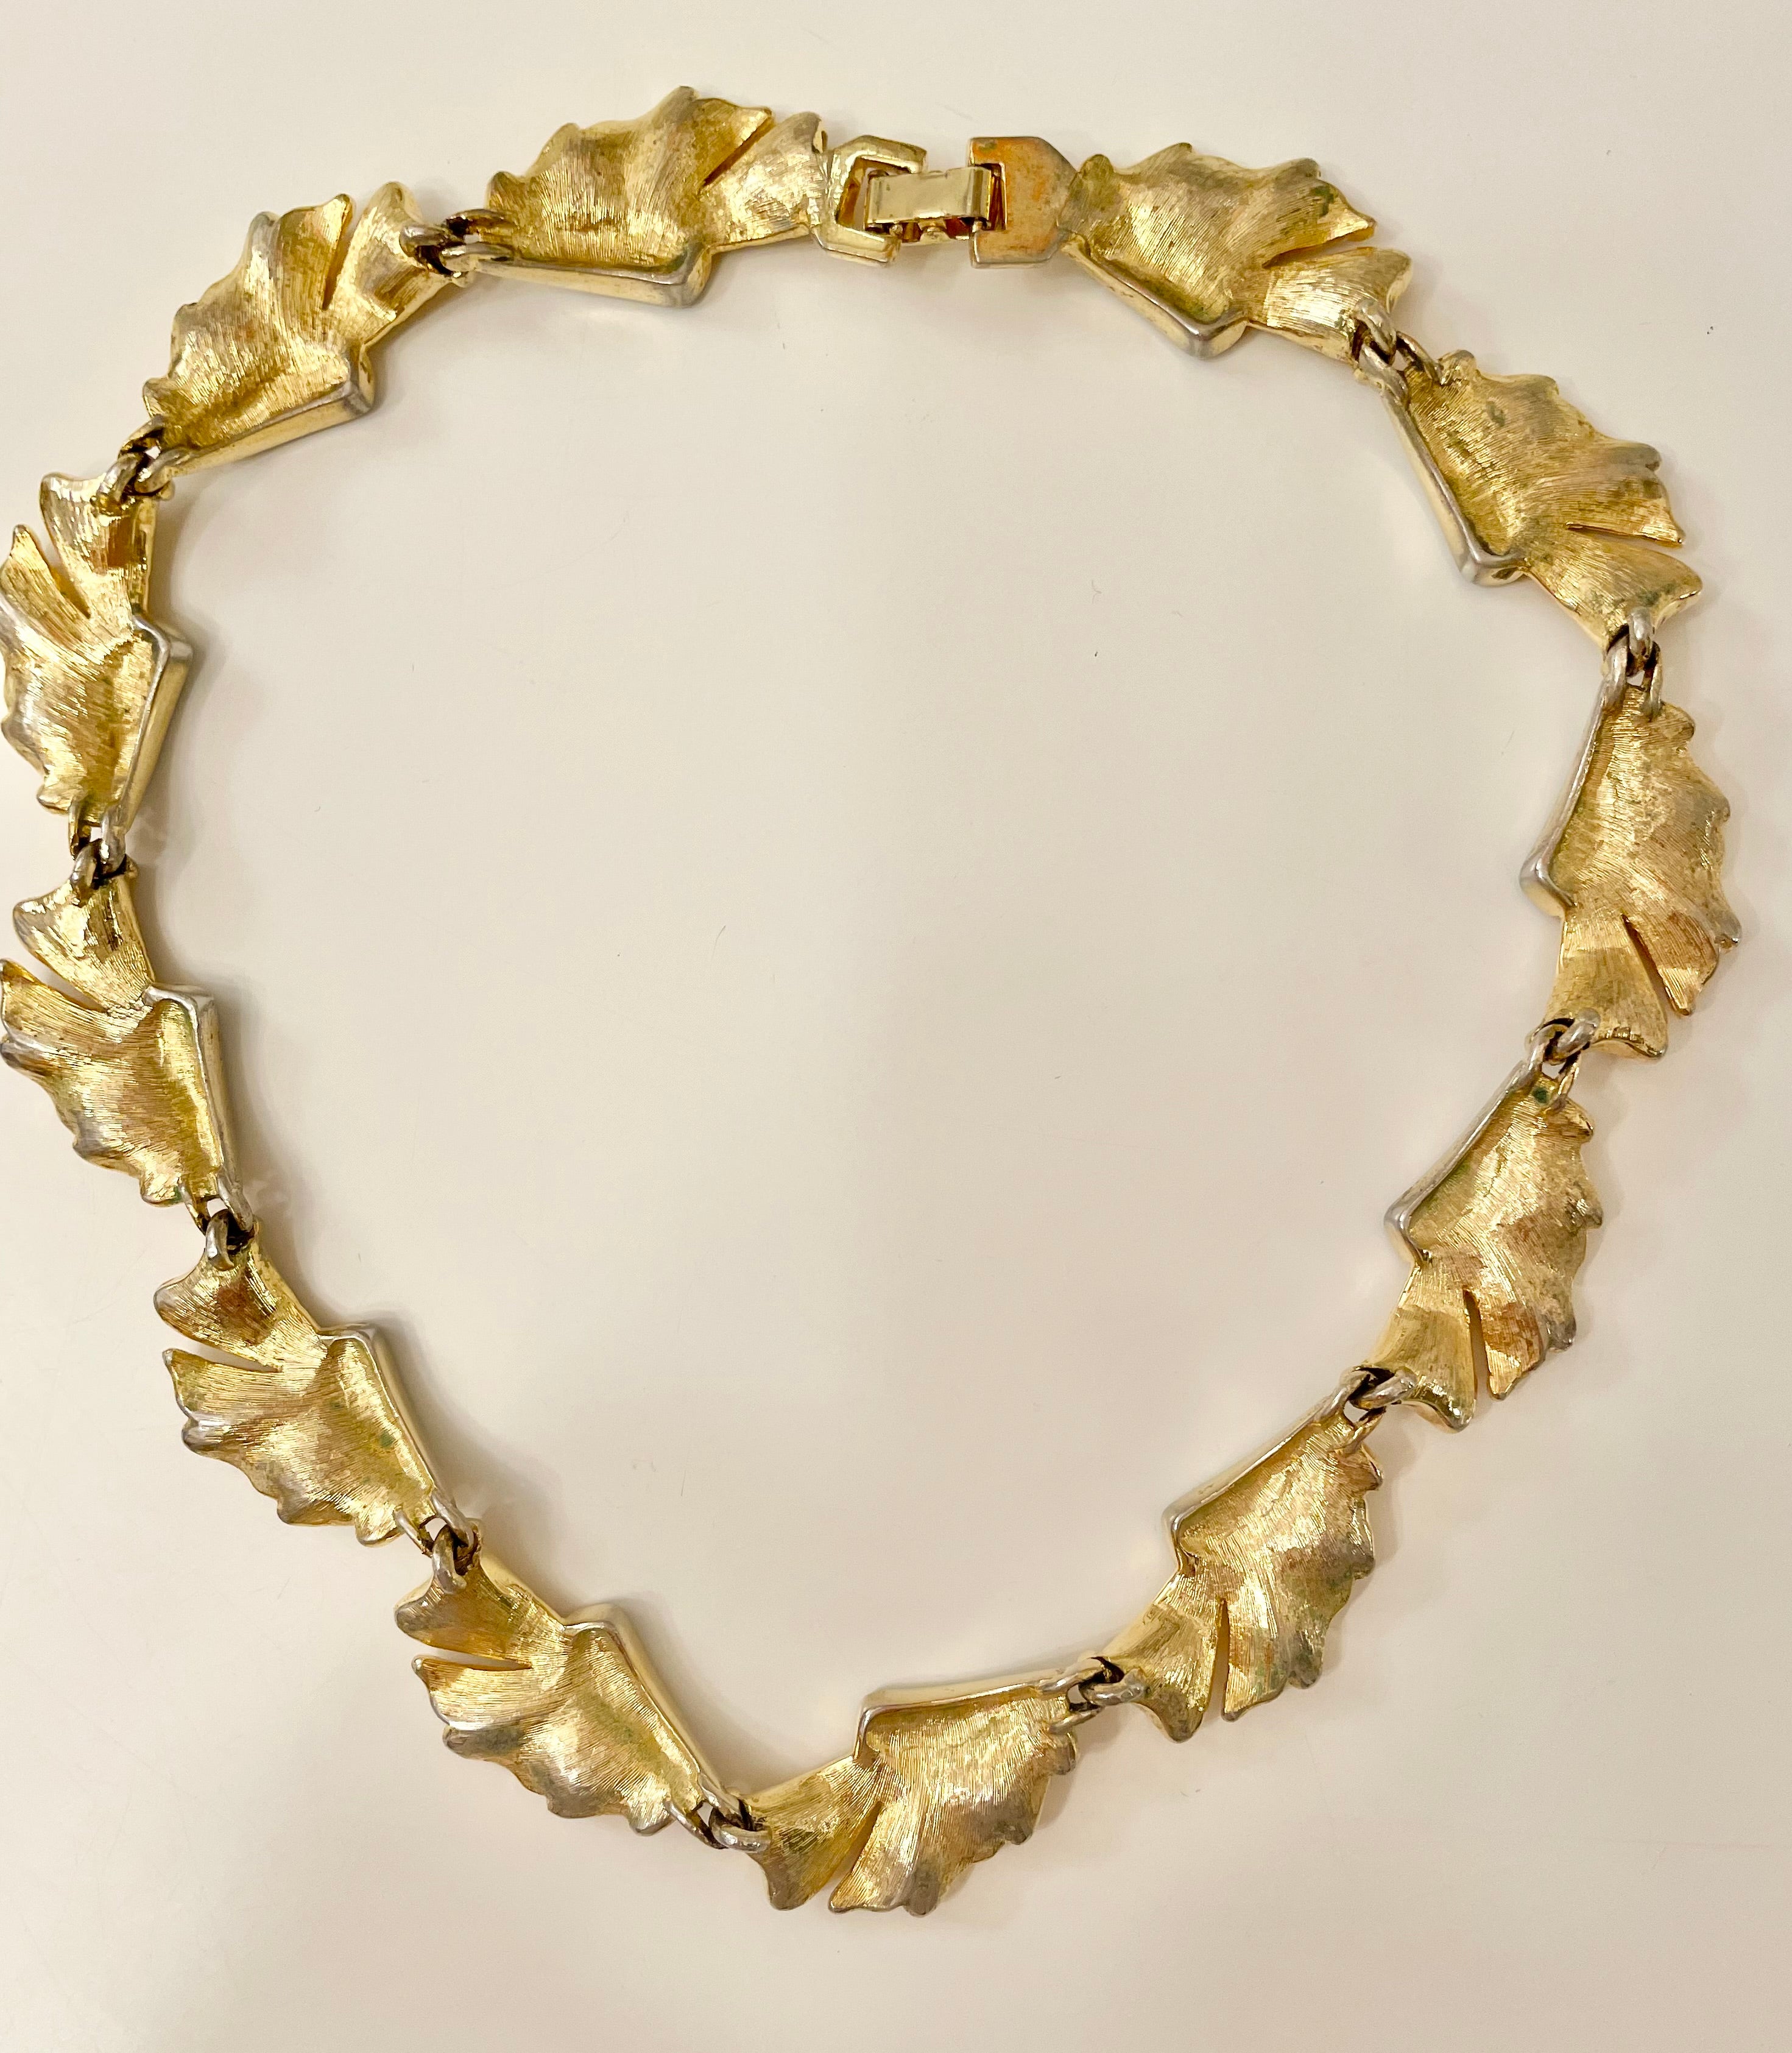 Vintage 1960's Socialite gold and pave set stone collar necklace. A rare beauty!